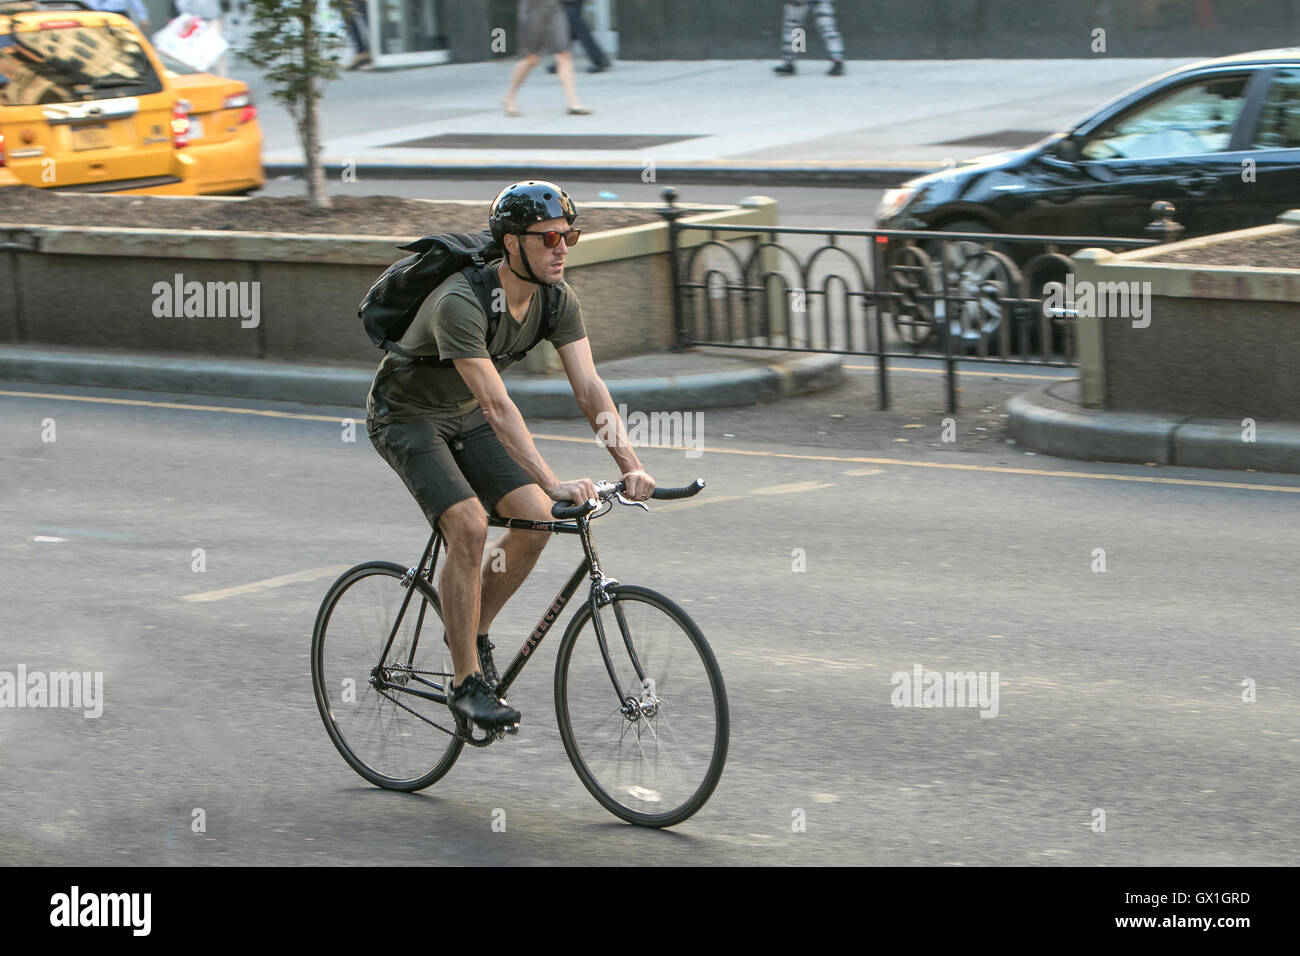 A man riding a bicycle. Stock Photo